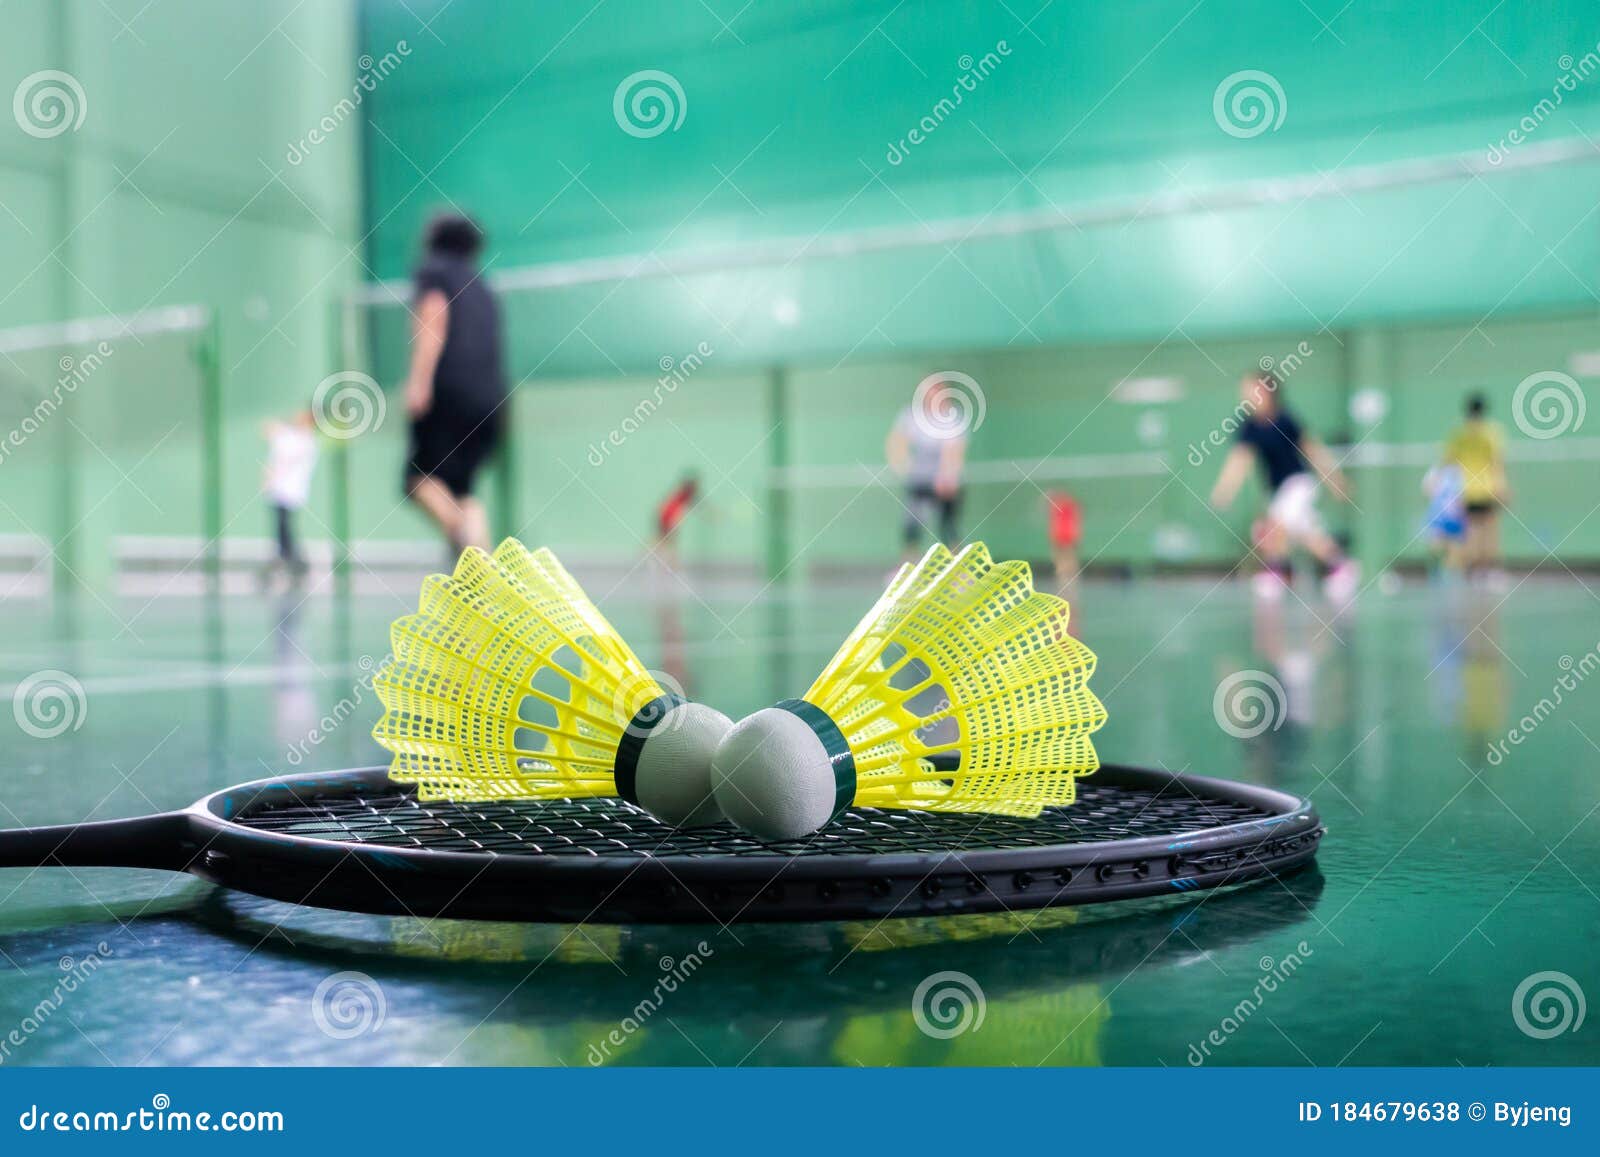 badminton courts with players competing